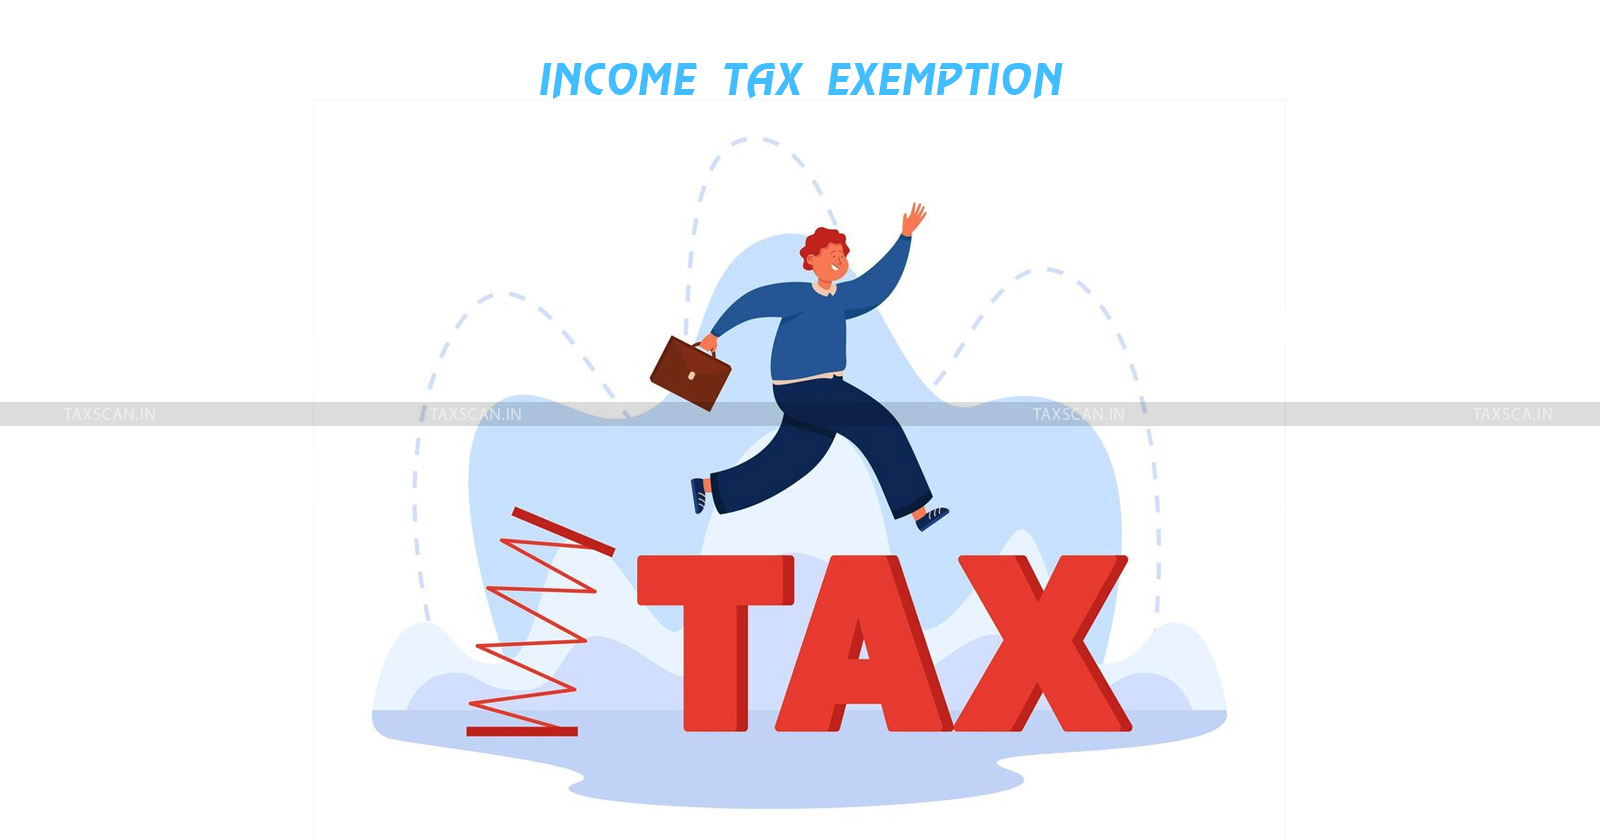 Exemption - Under Section 10(23B) - ITAT - Income Tax Act - Income Tax - Mere Technical Violation - Technical Violation - TAXSCAN